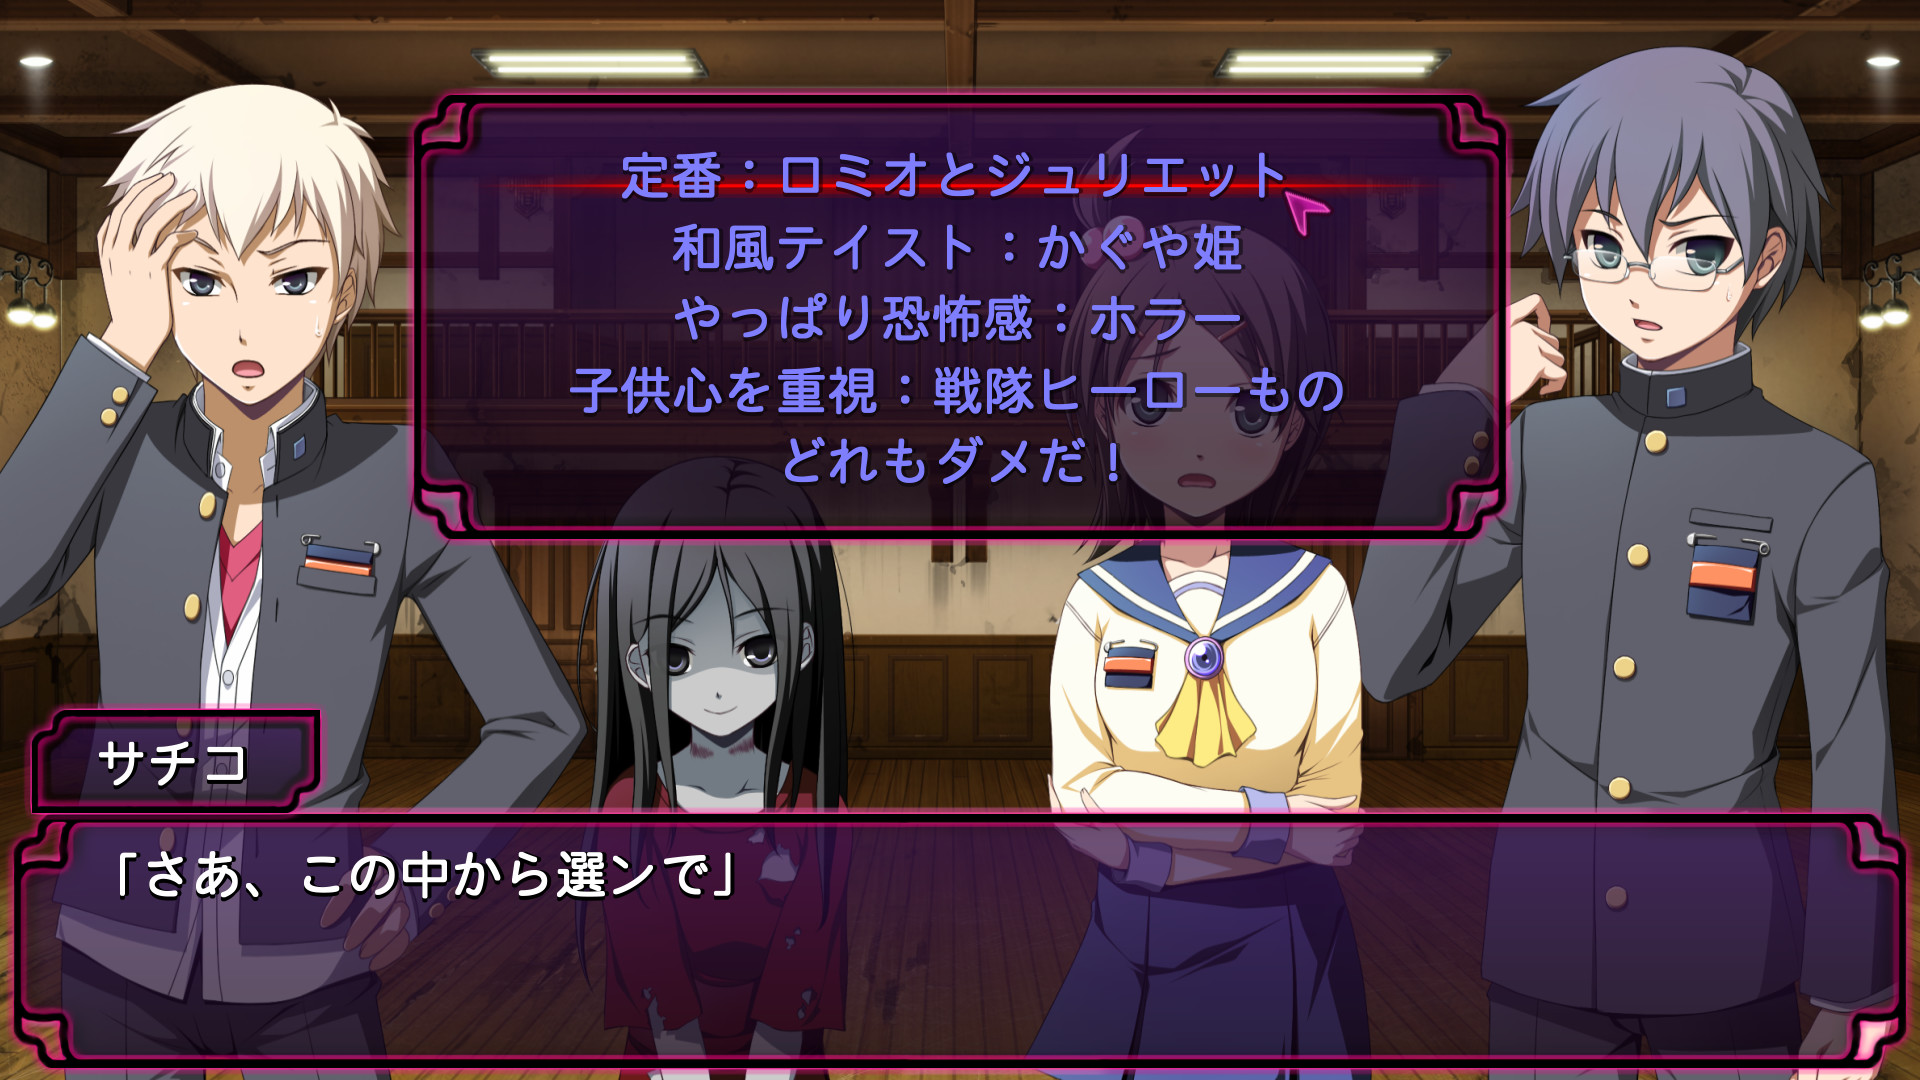 Steam Corpse Party Sweet Sachiko S Hysteric Birthday Bash